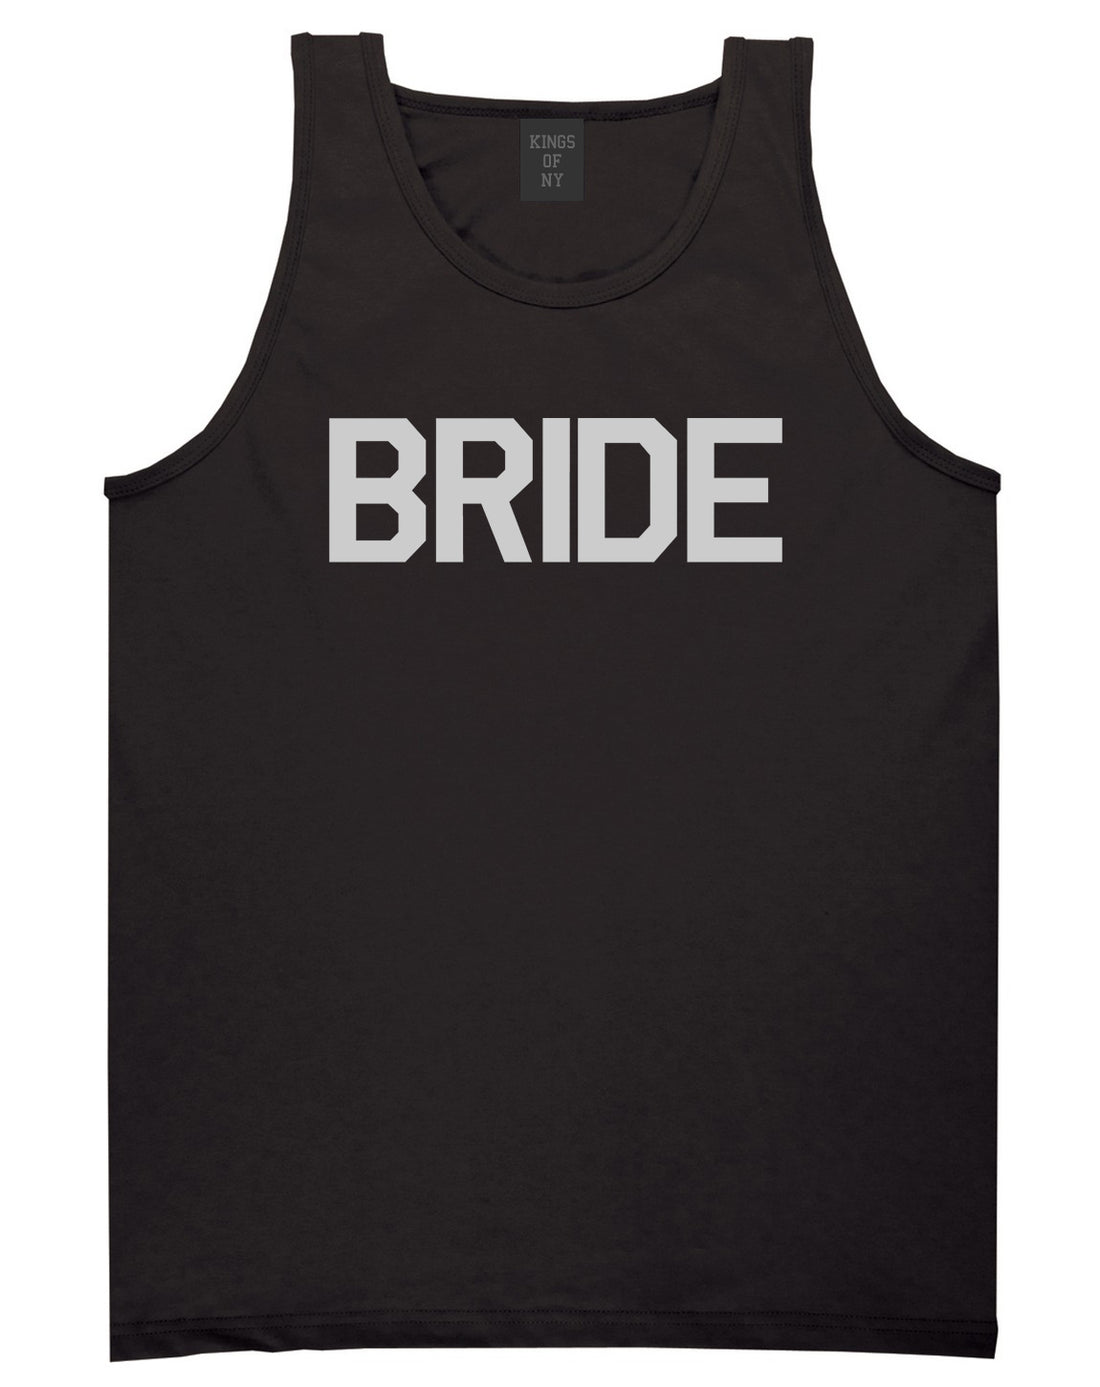 Bride Bachlorette Party Black Tank Top Shirt by Kings Of NY